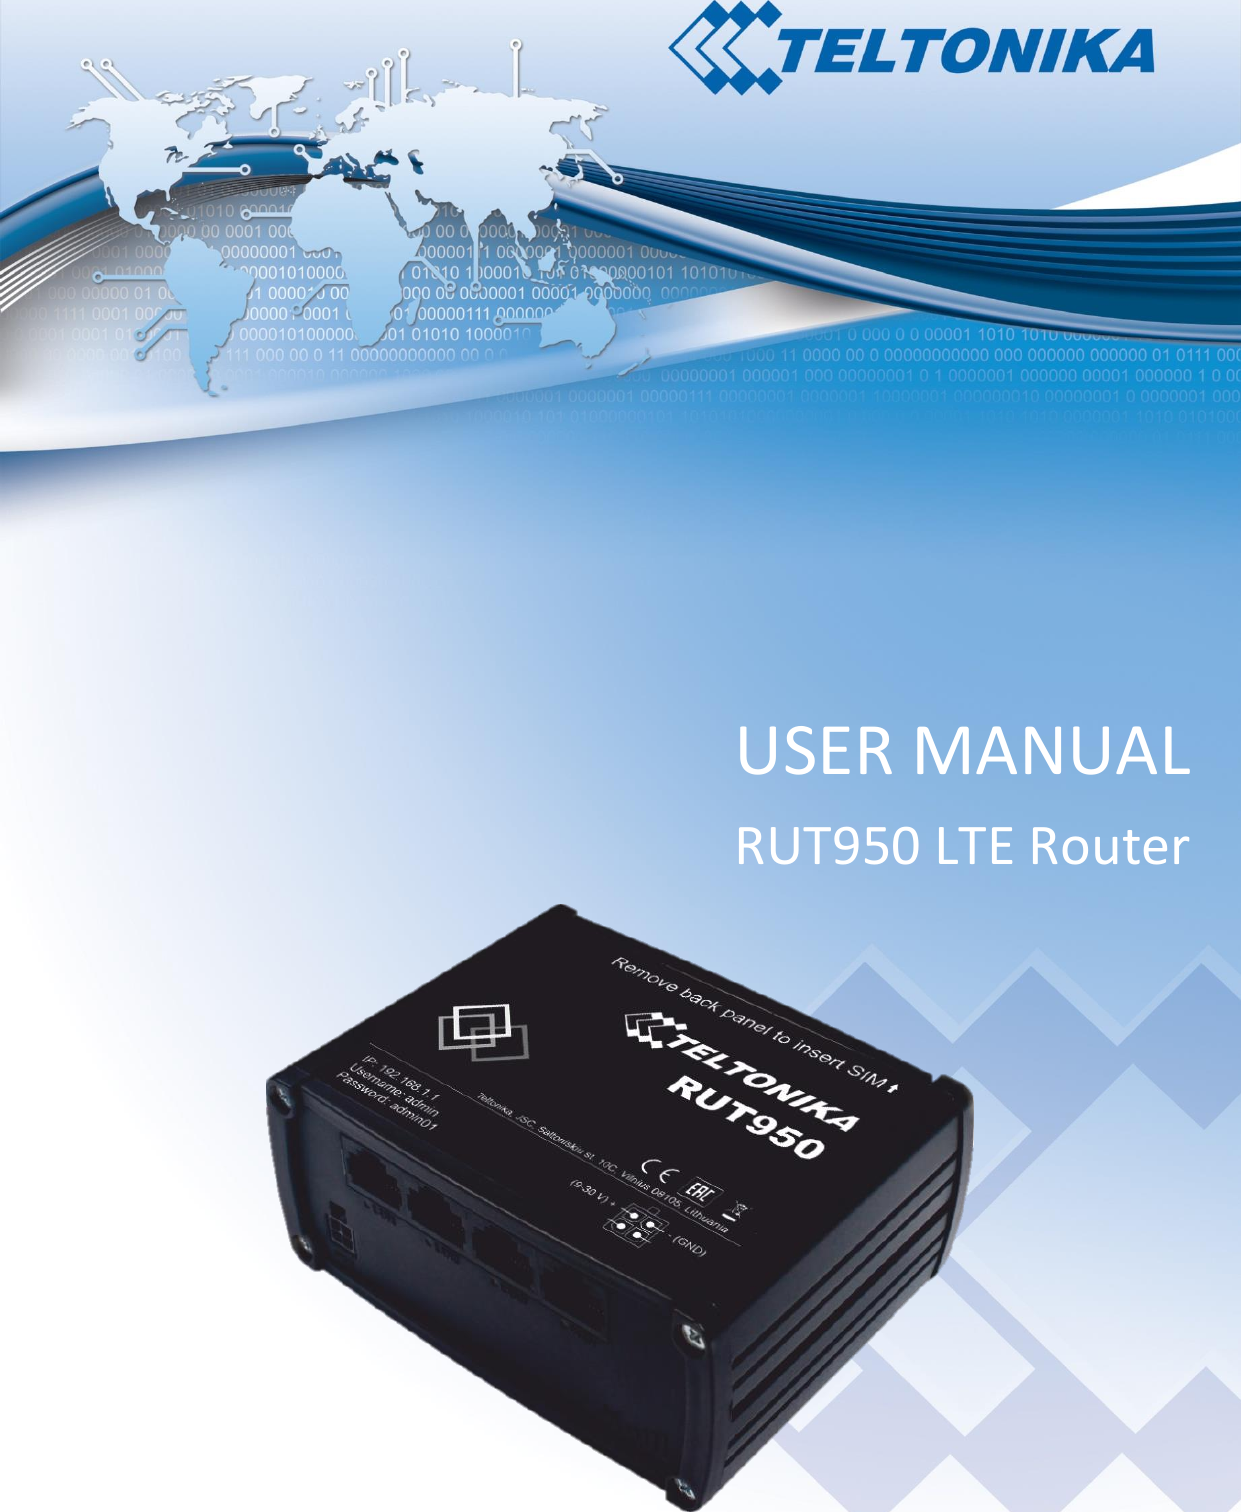  1  USER MANUAL RUT950 LTE Router     